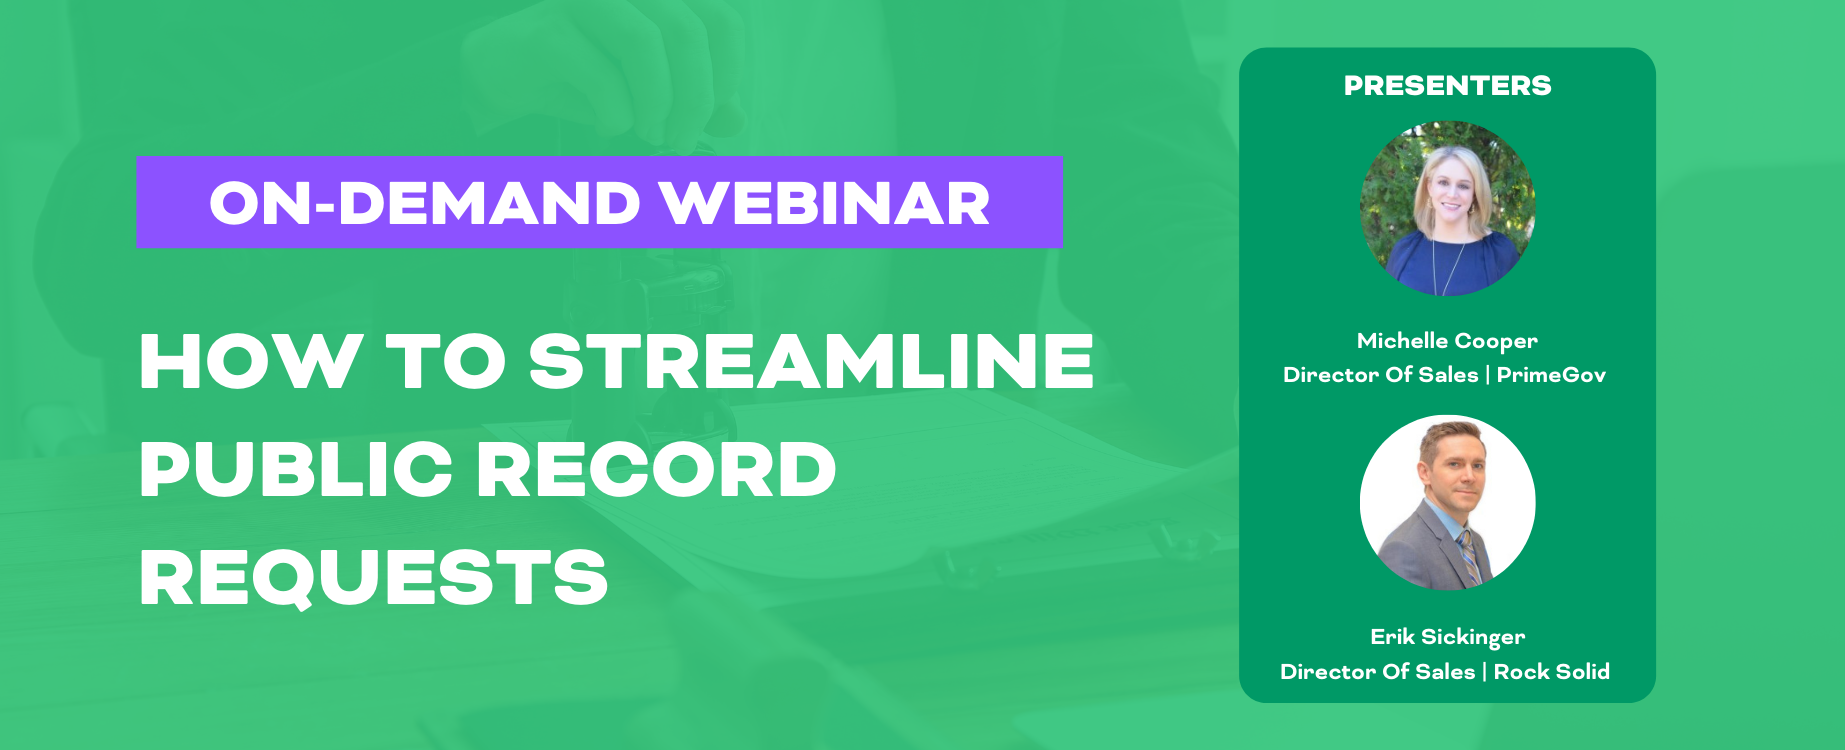 On demand webinar: How to streamline public record requests.